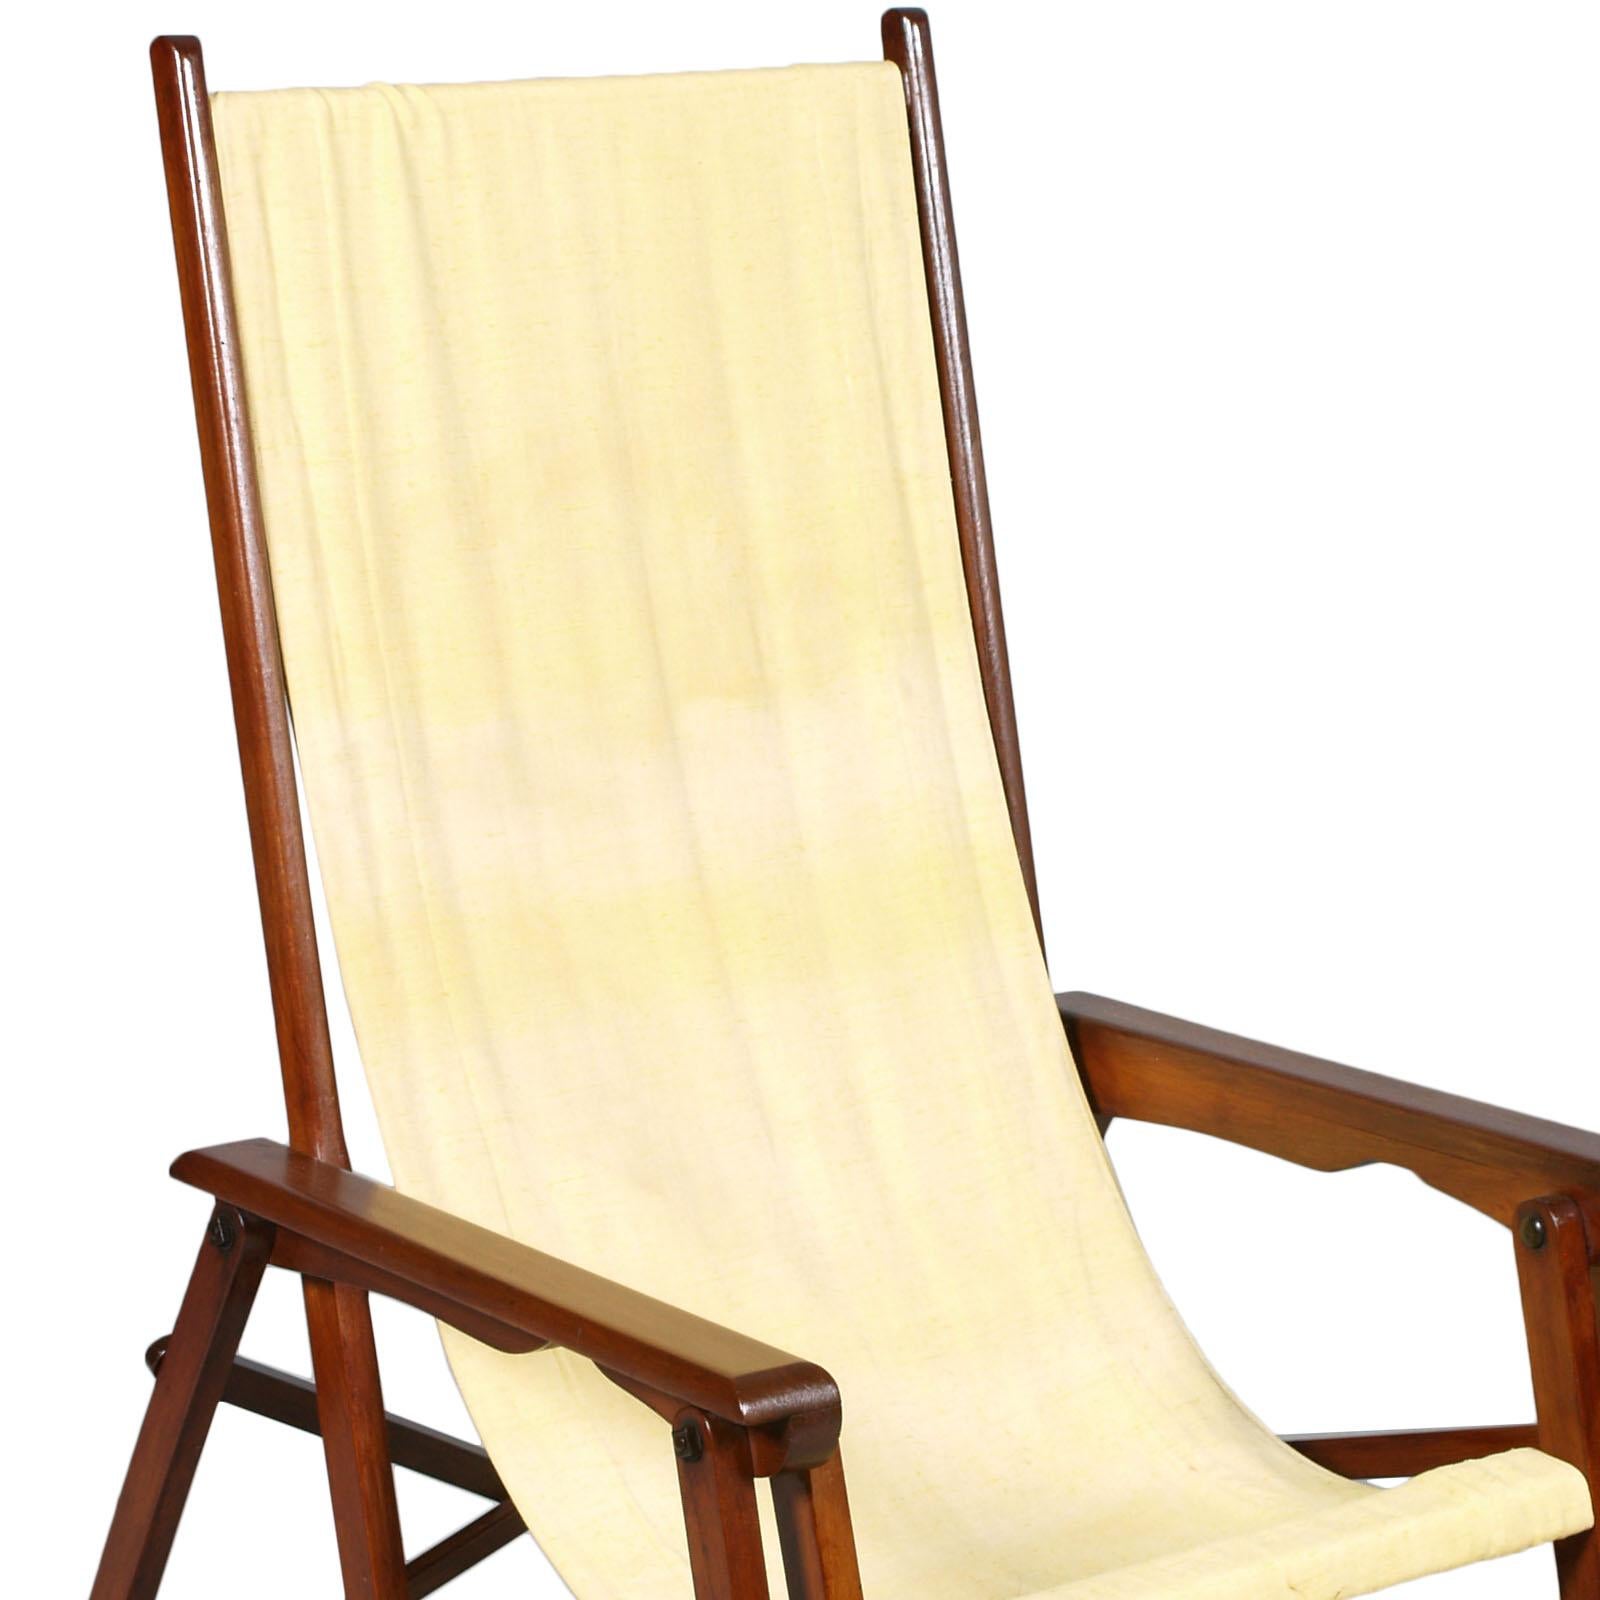 1950s French folding canvas long chair, Clairitex Chaise Long de Paquebot, sanitized and wax polished

Unusual and rare clairitex vintage French folding canvas long chair, Chaise longue de paquebot, 1950s thick cotton canvas seat removable made in